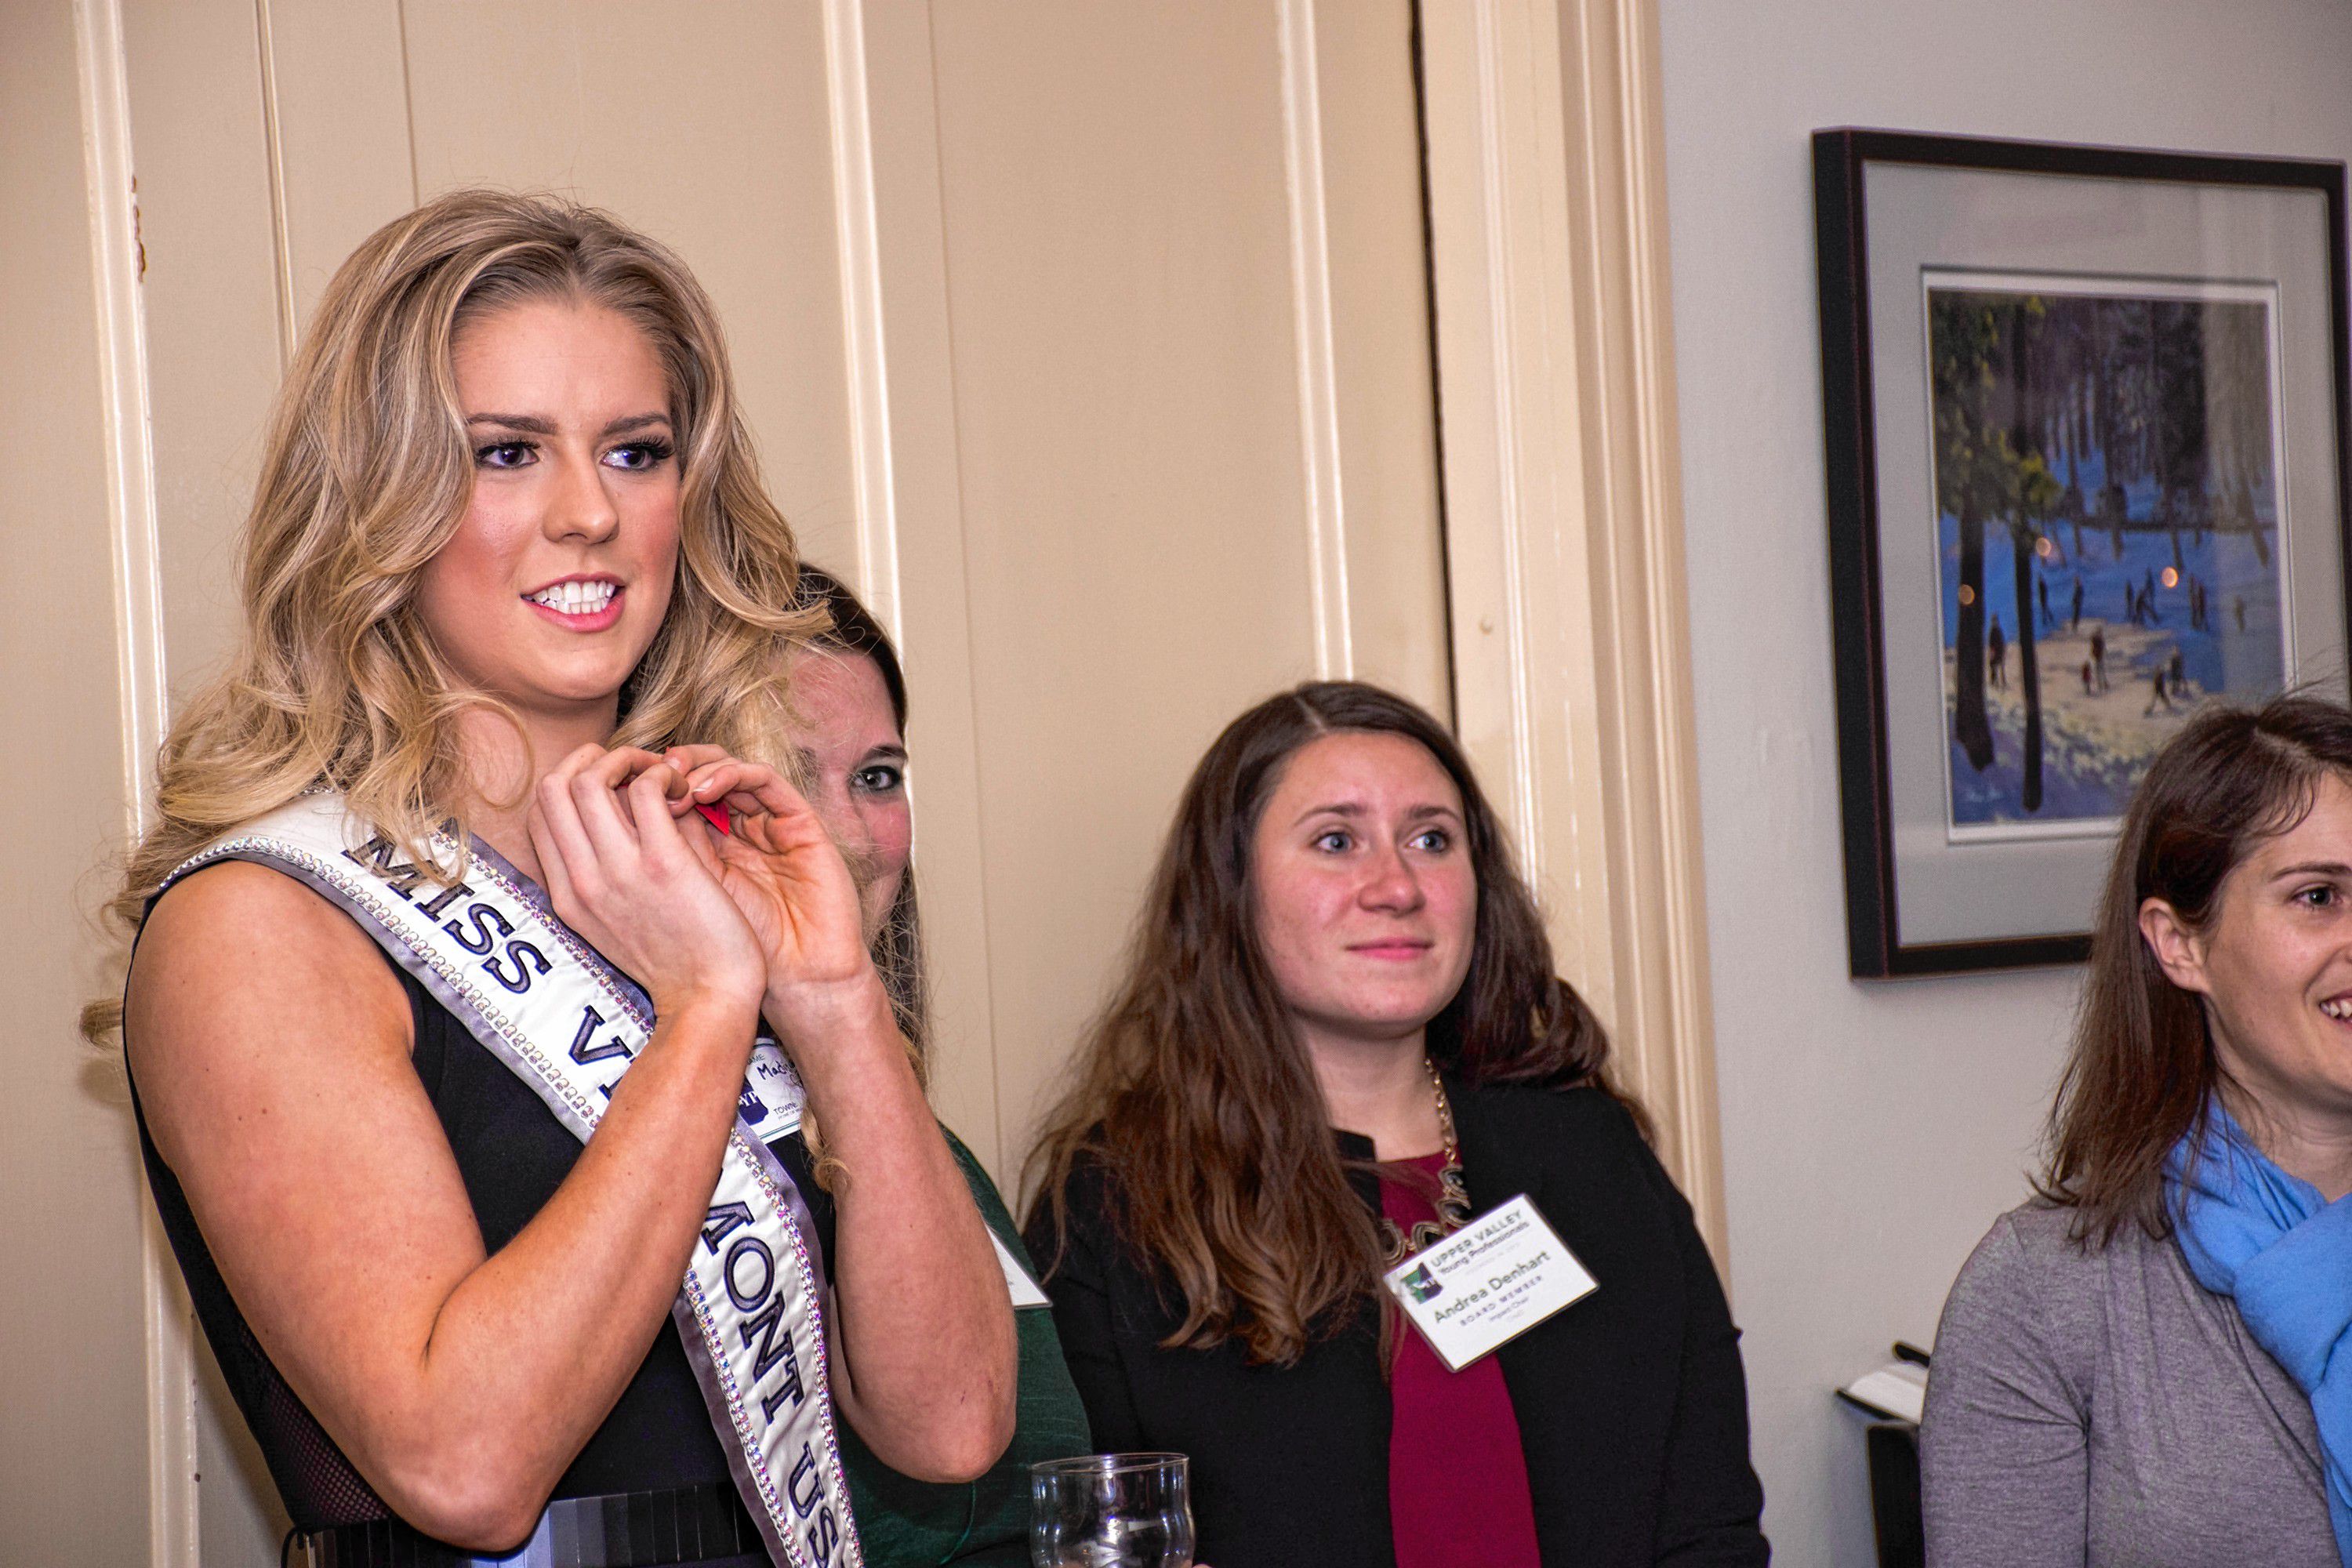 Madison Cota, Miss Vermont USA, picks a raffle winner for tickets to Northern Stage at the Upper Valley Young Professionals holiday party and canned food drive at the Norwich Inn on Dec. 15. (Nancy Nutile-McMenemy photograph, photosbynanci@comcast.net)